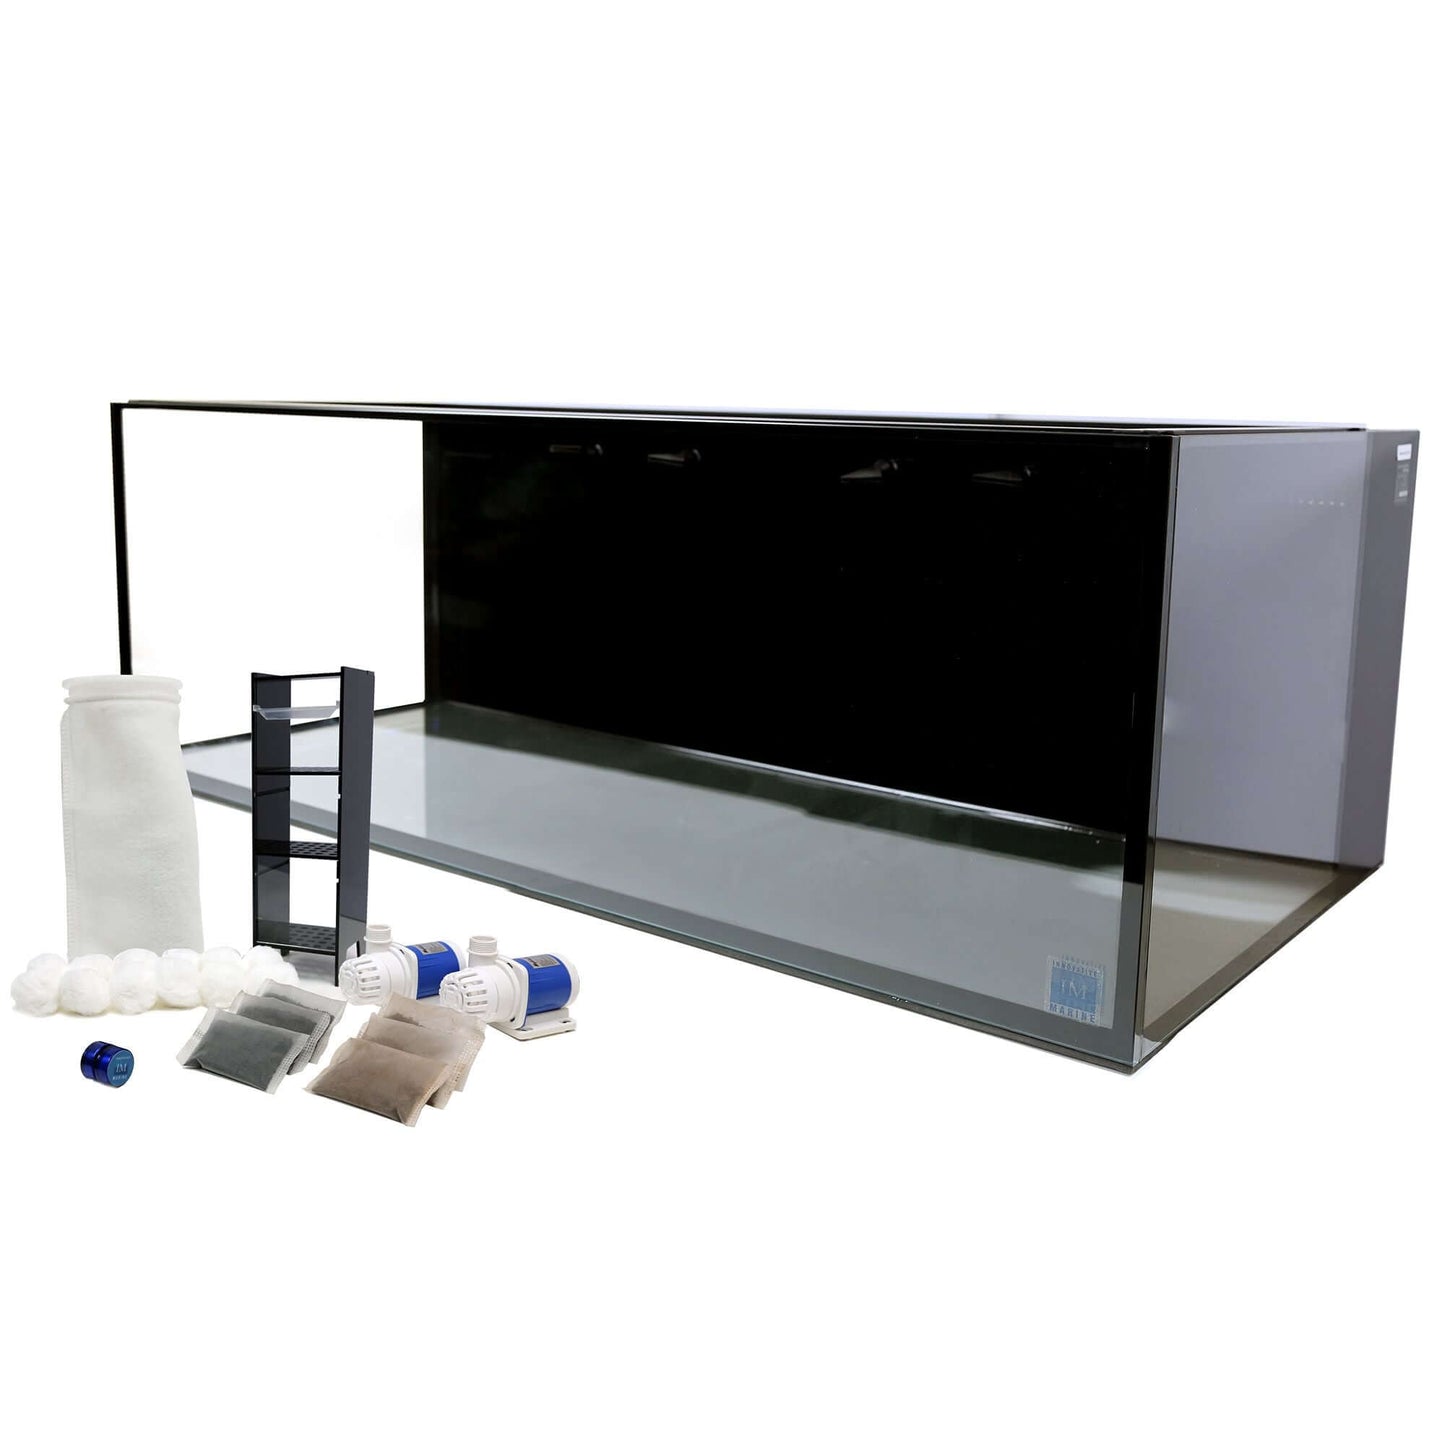 NUVO SR Pro 2 | 80 AIO Aquarium with APS Stand Included (White/Black) - Innovative Marine